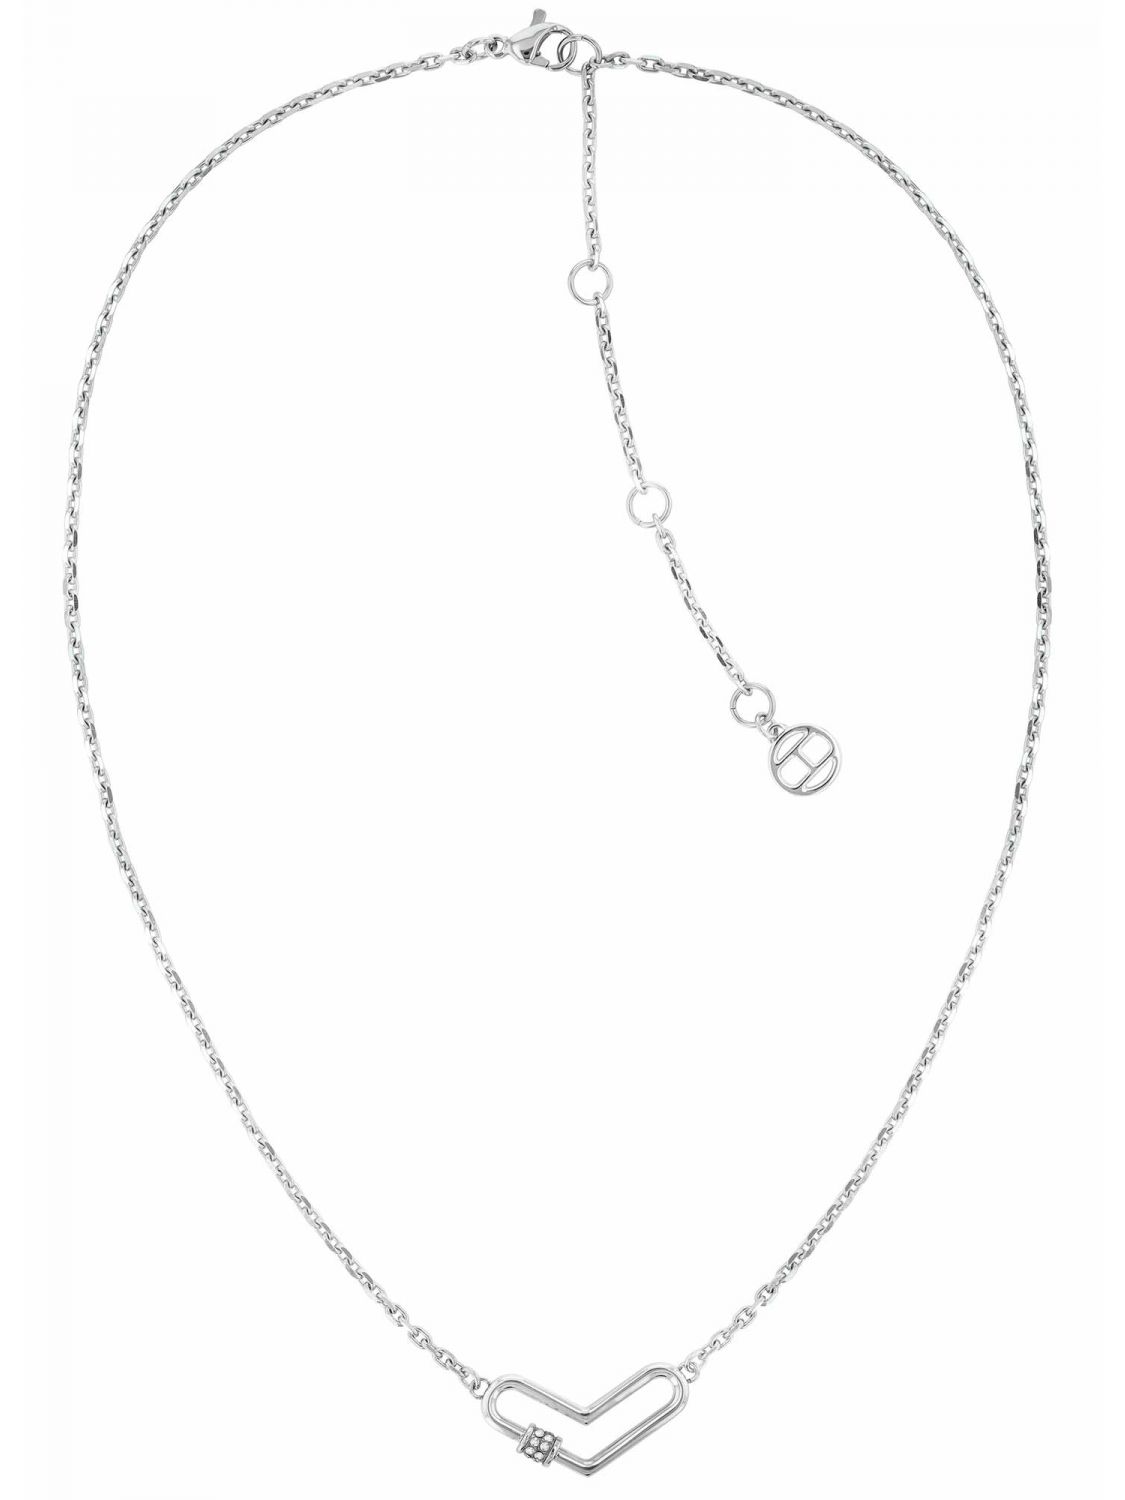 Hilfiger Women's Necklace Stainless Steel 2780441